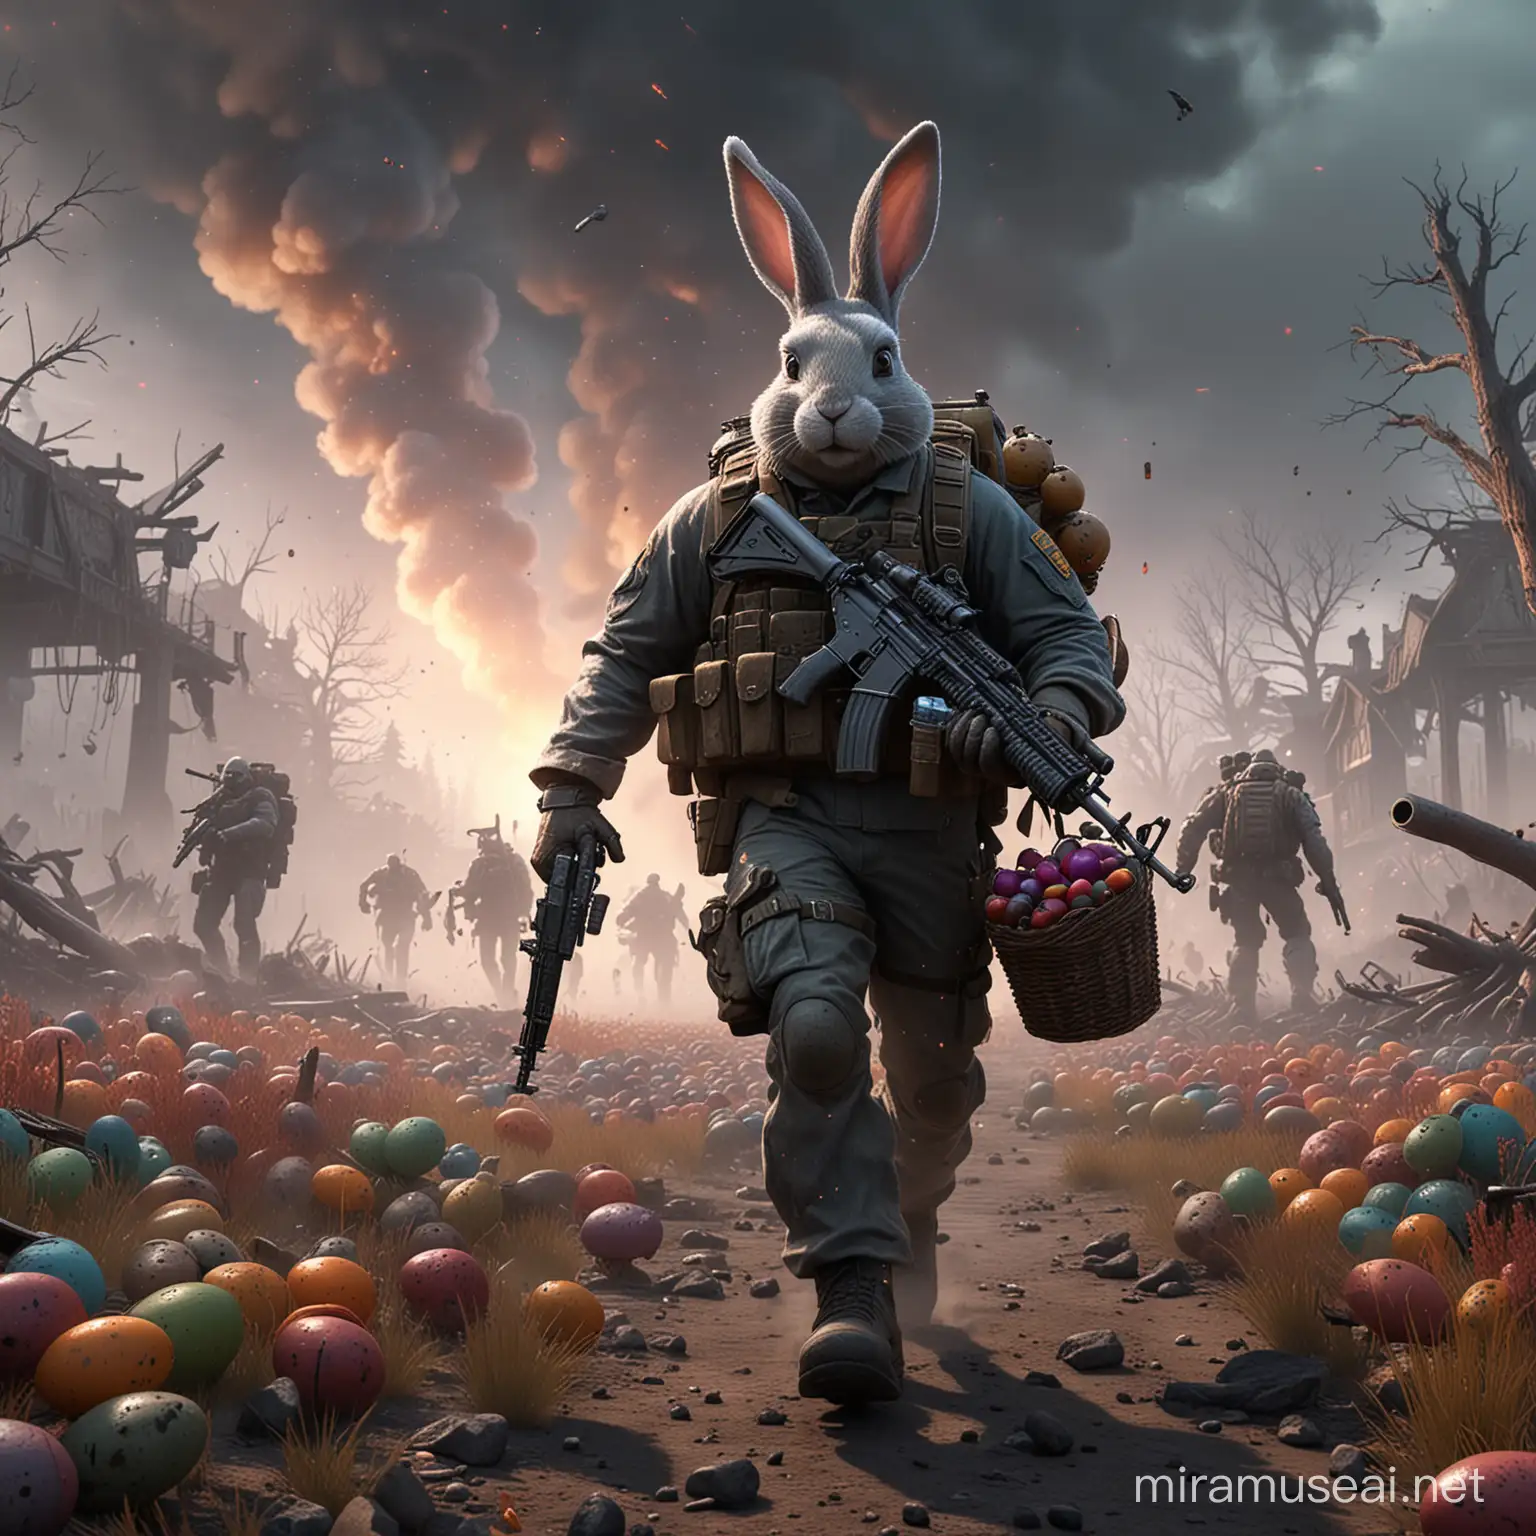 a cartoon easter bunny with a basket full of easter egg colored hand granades and a machine gun over his shoulder and ammo belts over each shoulder crossing on his chest, a horde of zombies creeping in the distance. volumetric fog atmosphere, fires, explosions and mushroom clouds fill the background. apocalyptic setting and scene. hyper color, hyper detail, high resolution, 4k, raytracing, dramatic lighting, in the art style of brandt peters